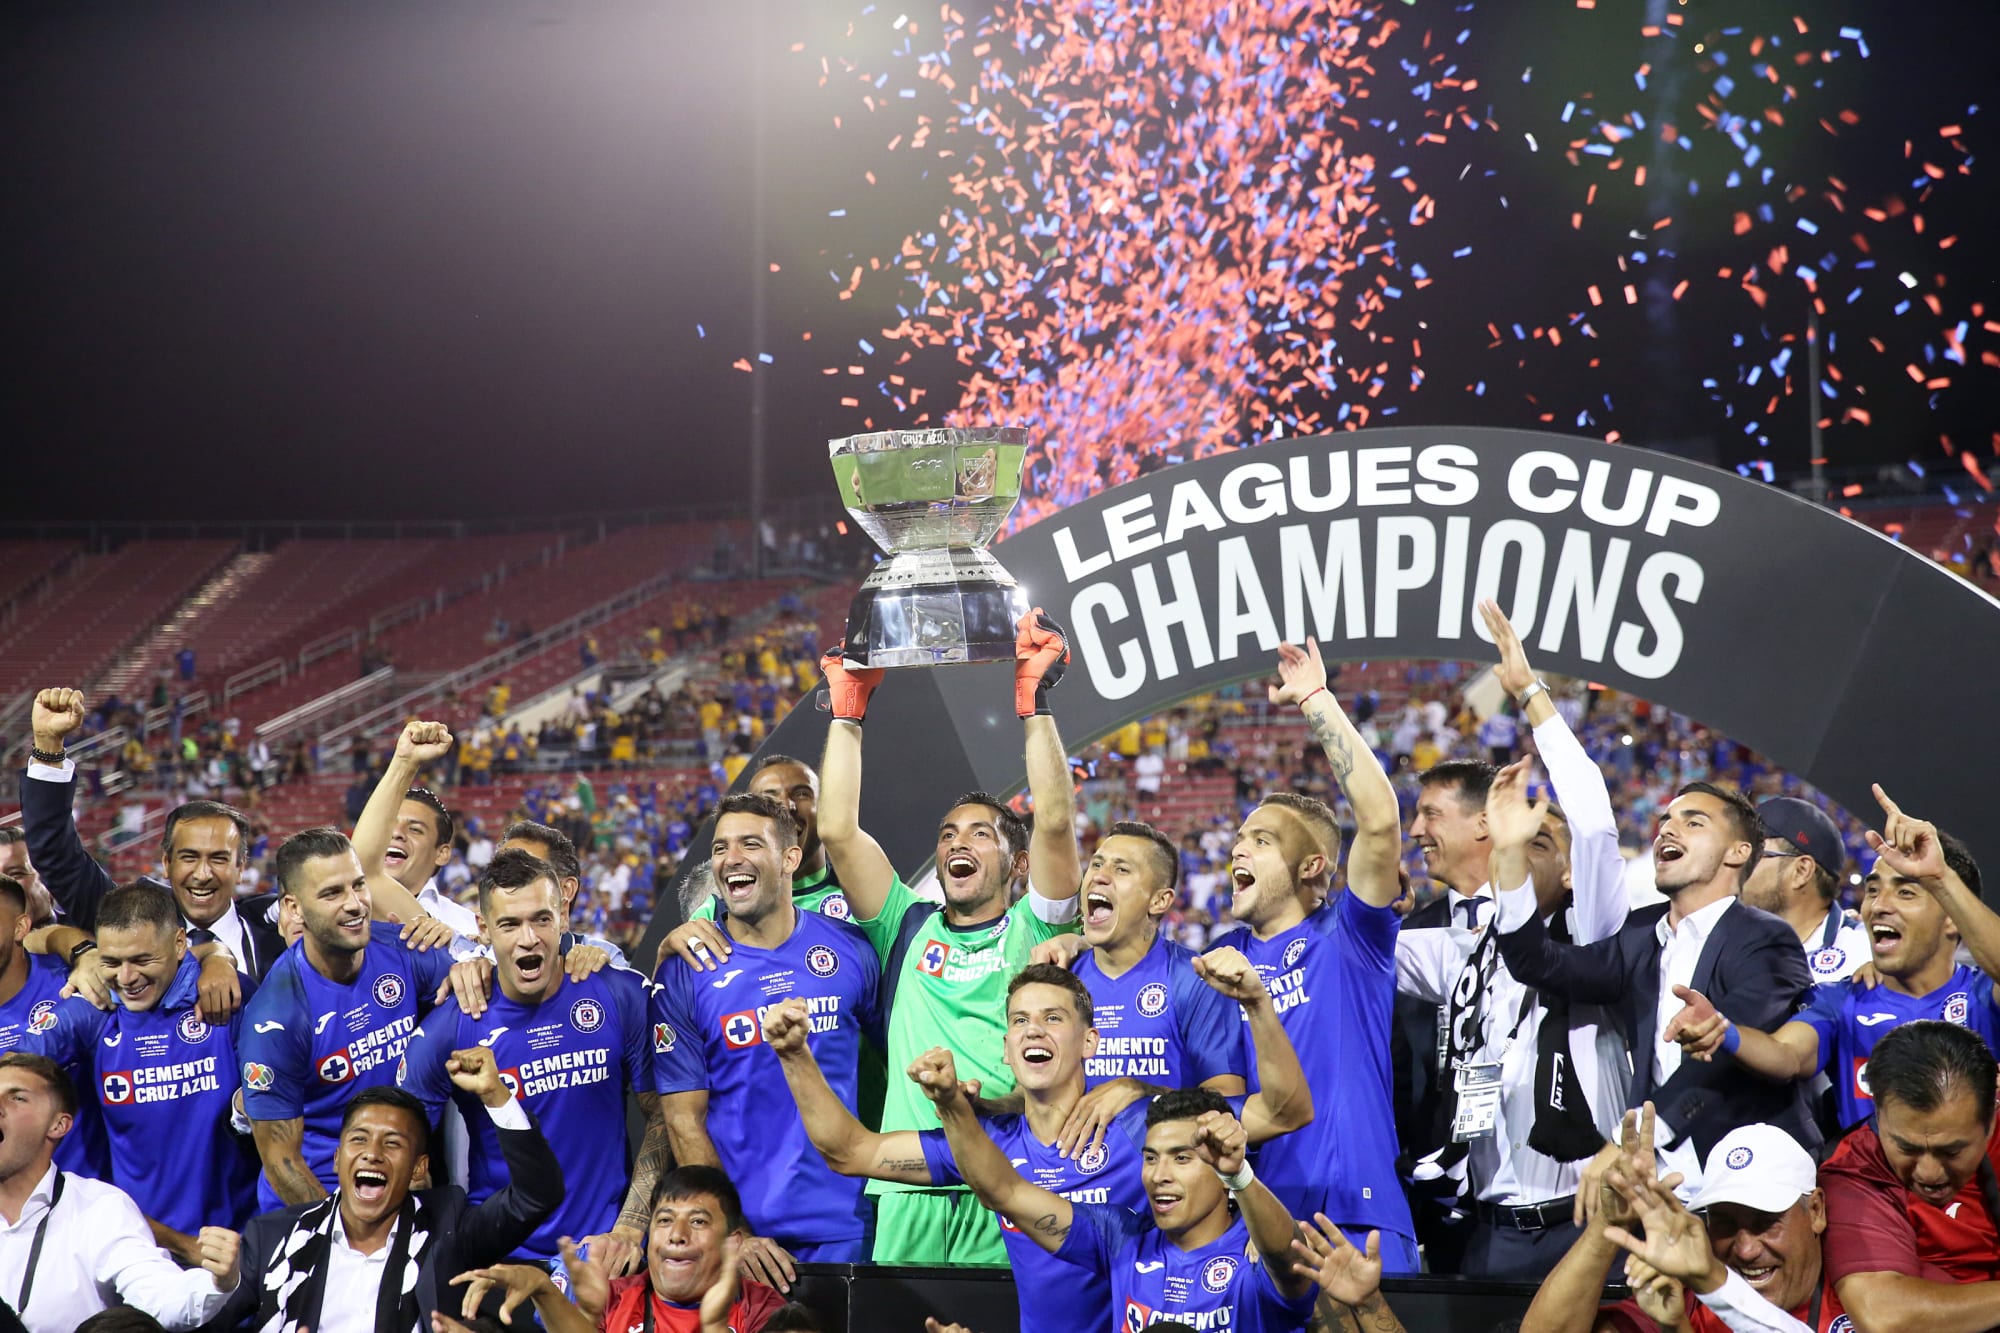 Cruz Azul win inaugural Leagues Cup title with win over Tigres